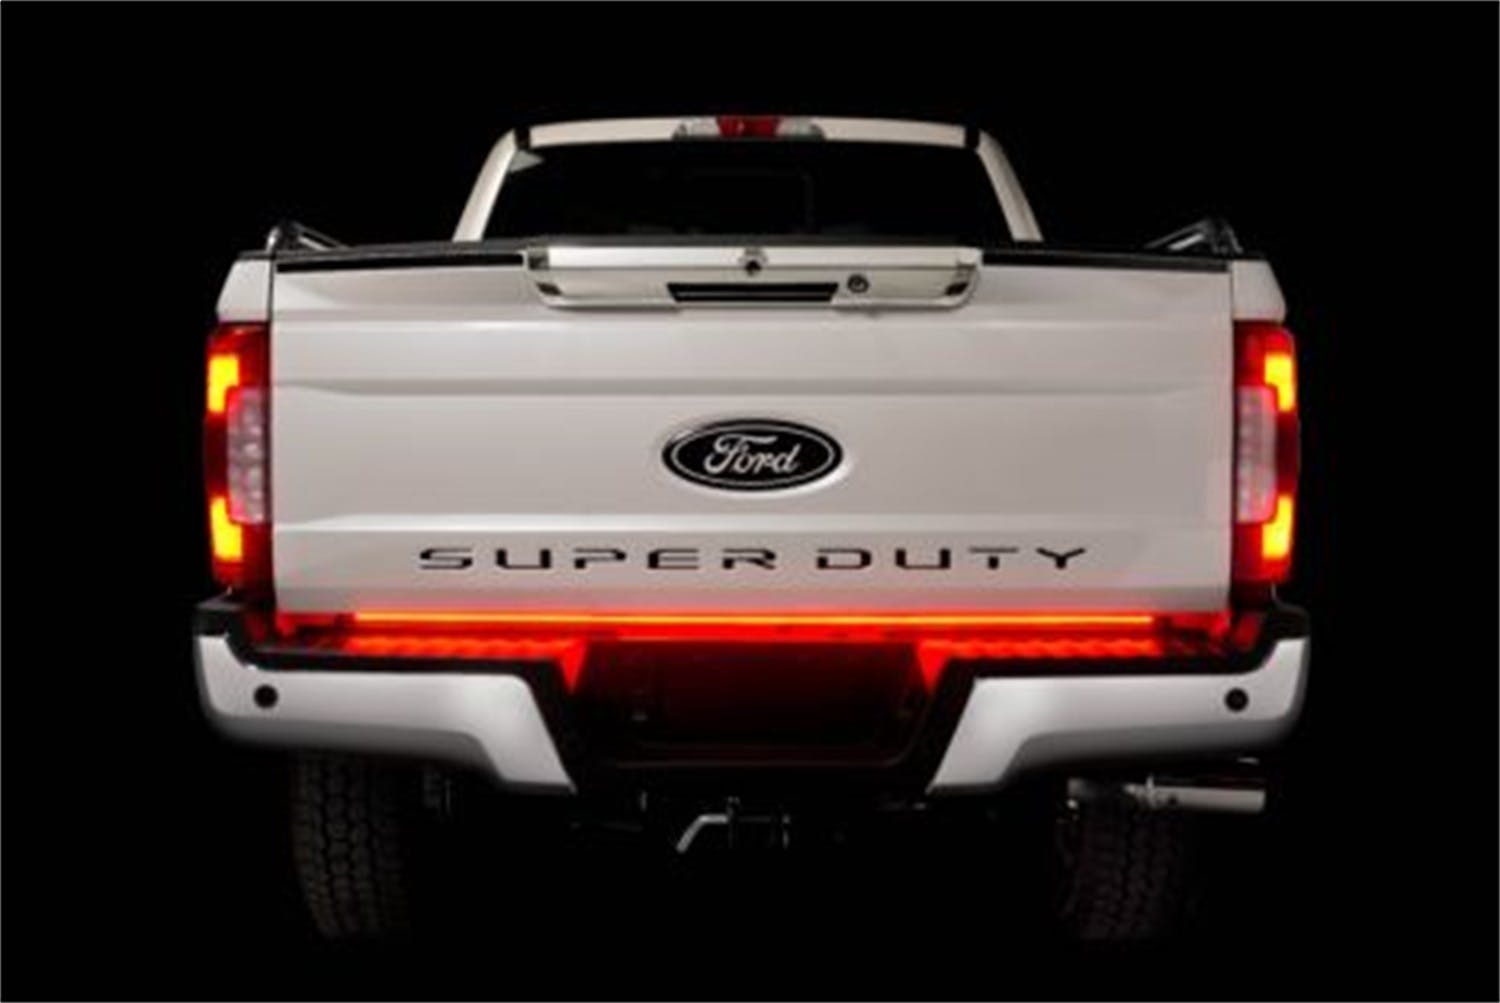 Putco 92010-60 60 inch RED Blade LED Light Bar for Ford Trucks with Blis and Trailer detection